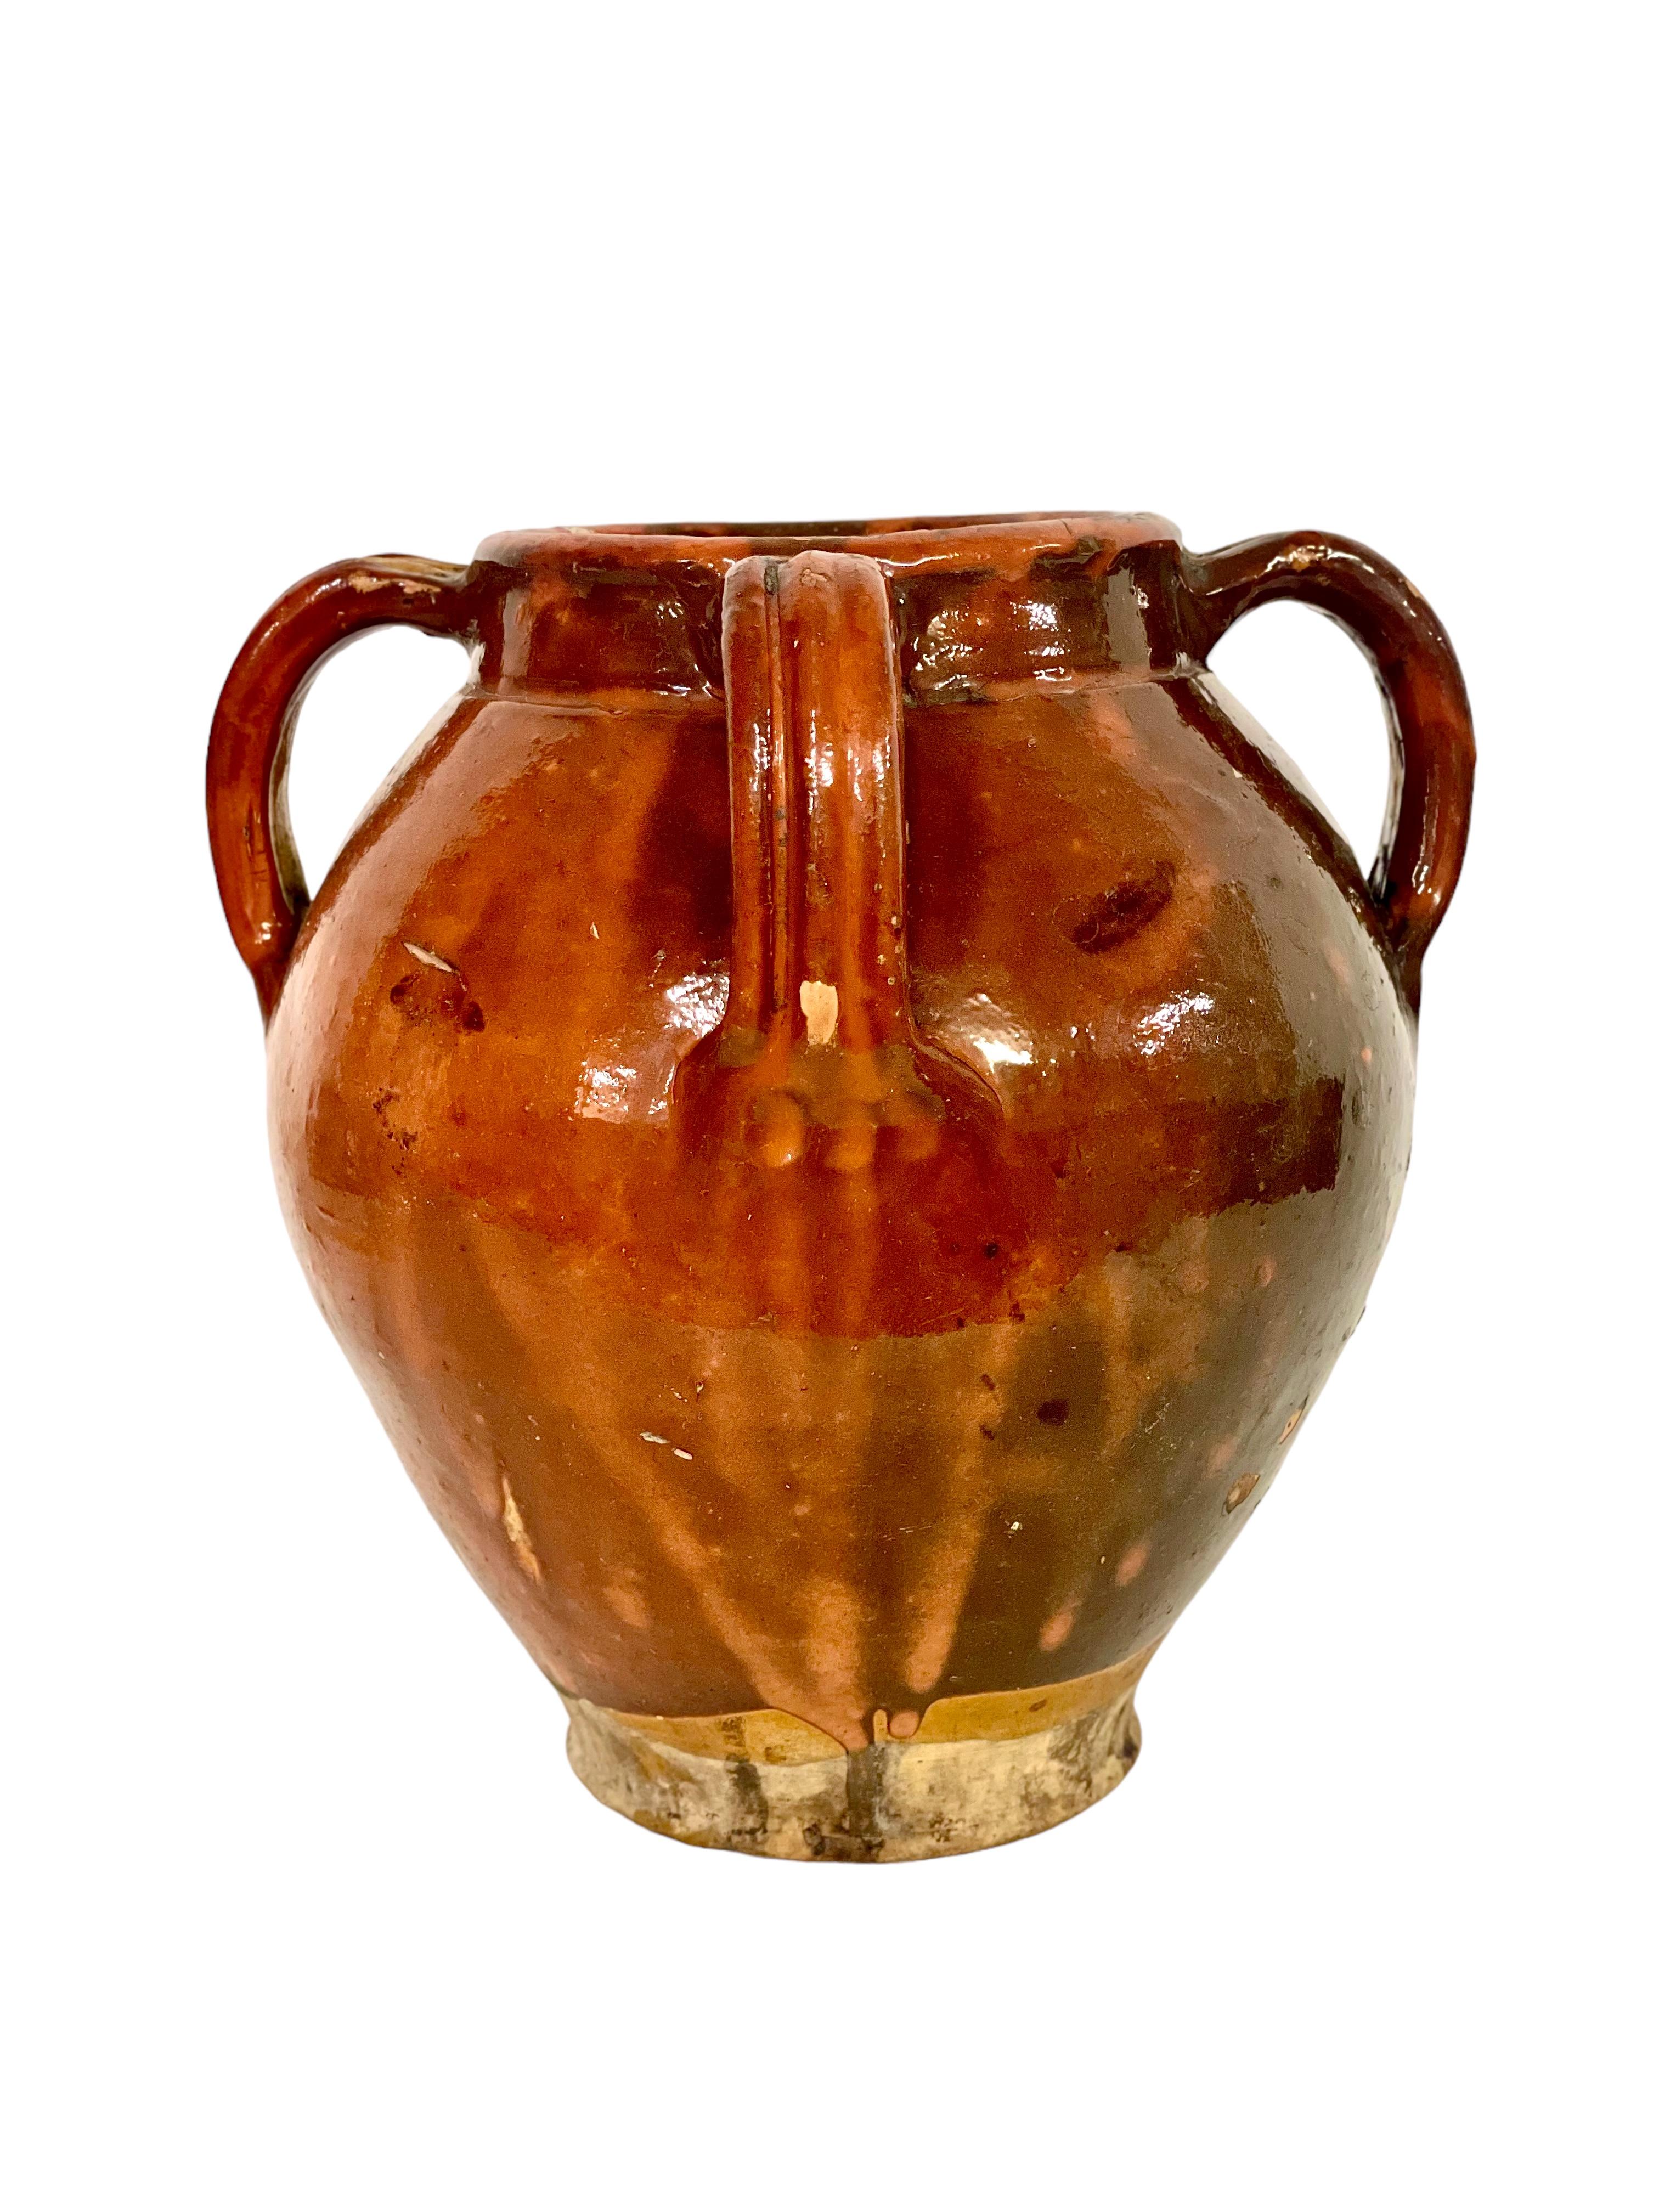 19th Century 19th C. Terracotta Jug with Three Handles For Sale